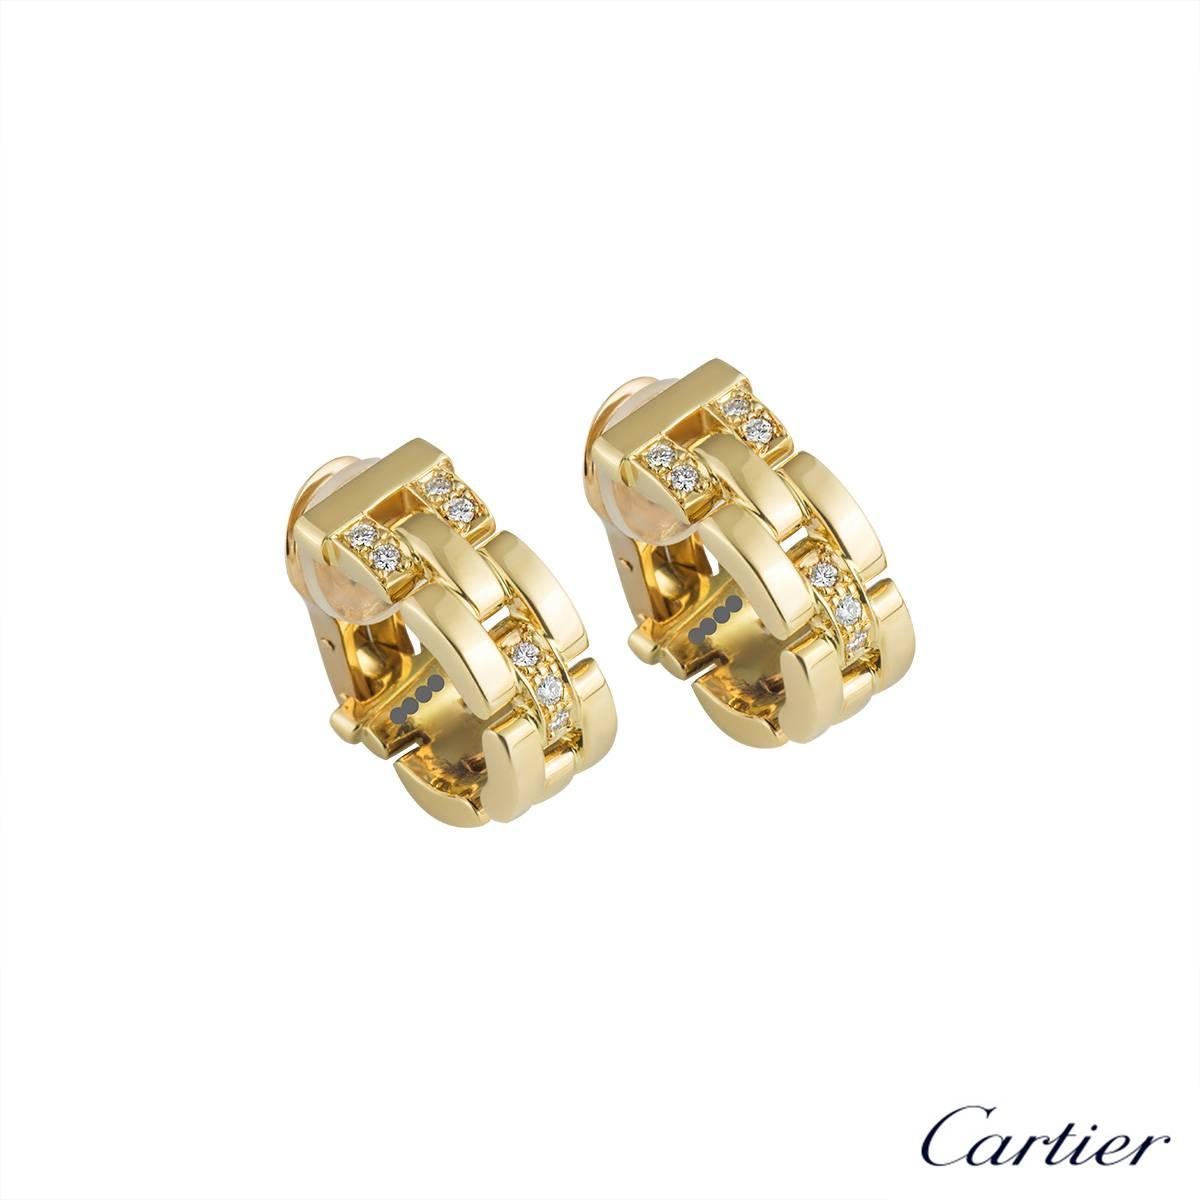 A pair of 18k yellow gold Maillon Panthere earrings by Cartier. Each hoop style earring is made up of iconic flat 18k yellow gold solid links with 3 pave set diamond intersections, totalling approximately 0.20ct. The earrings measure 2cm X 0.8cm and